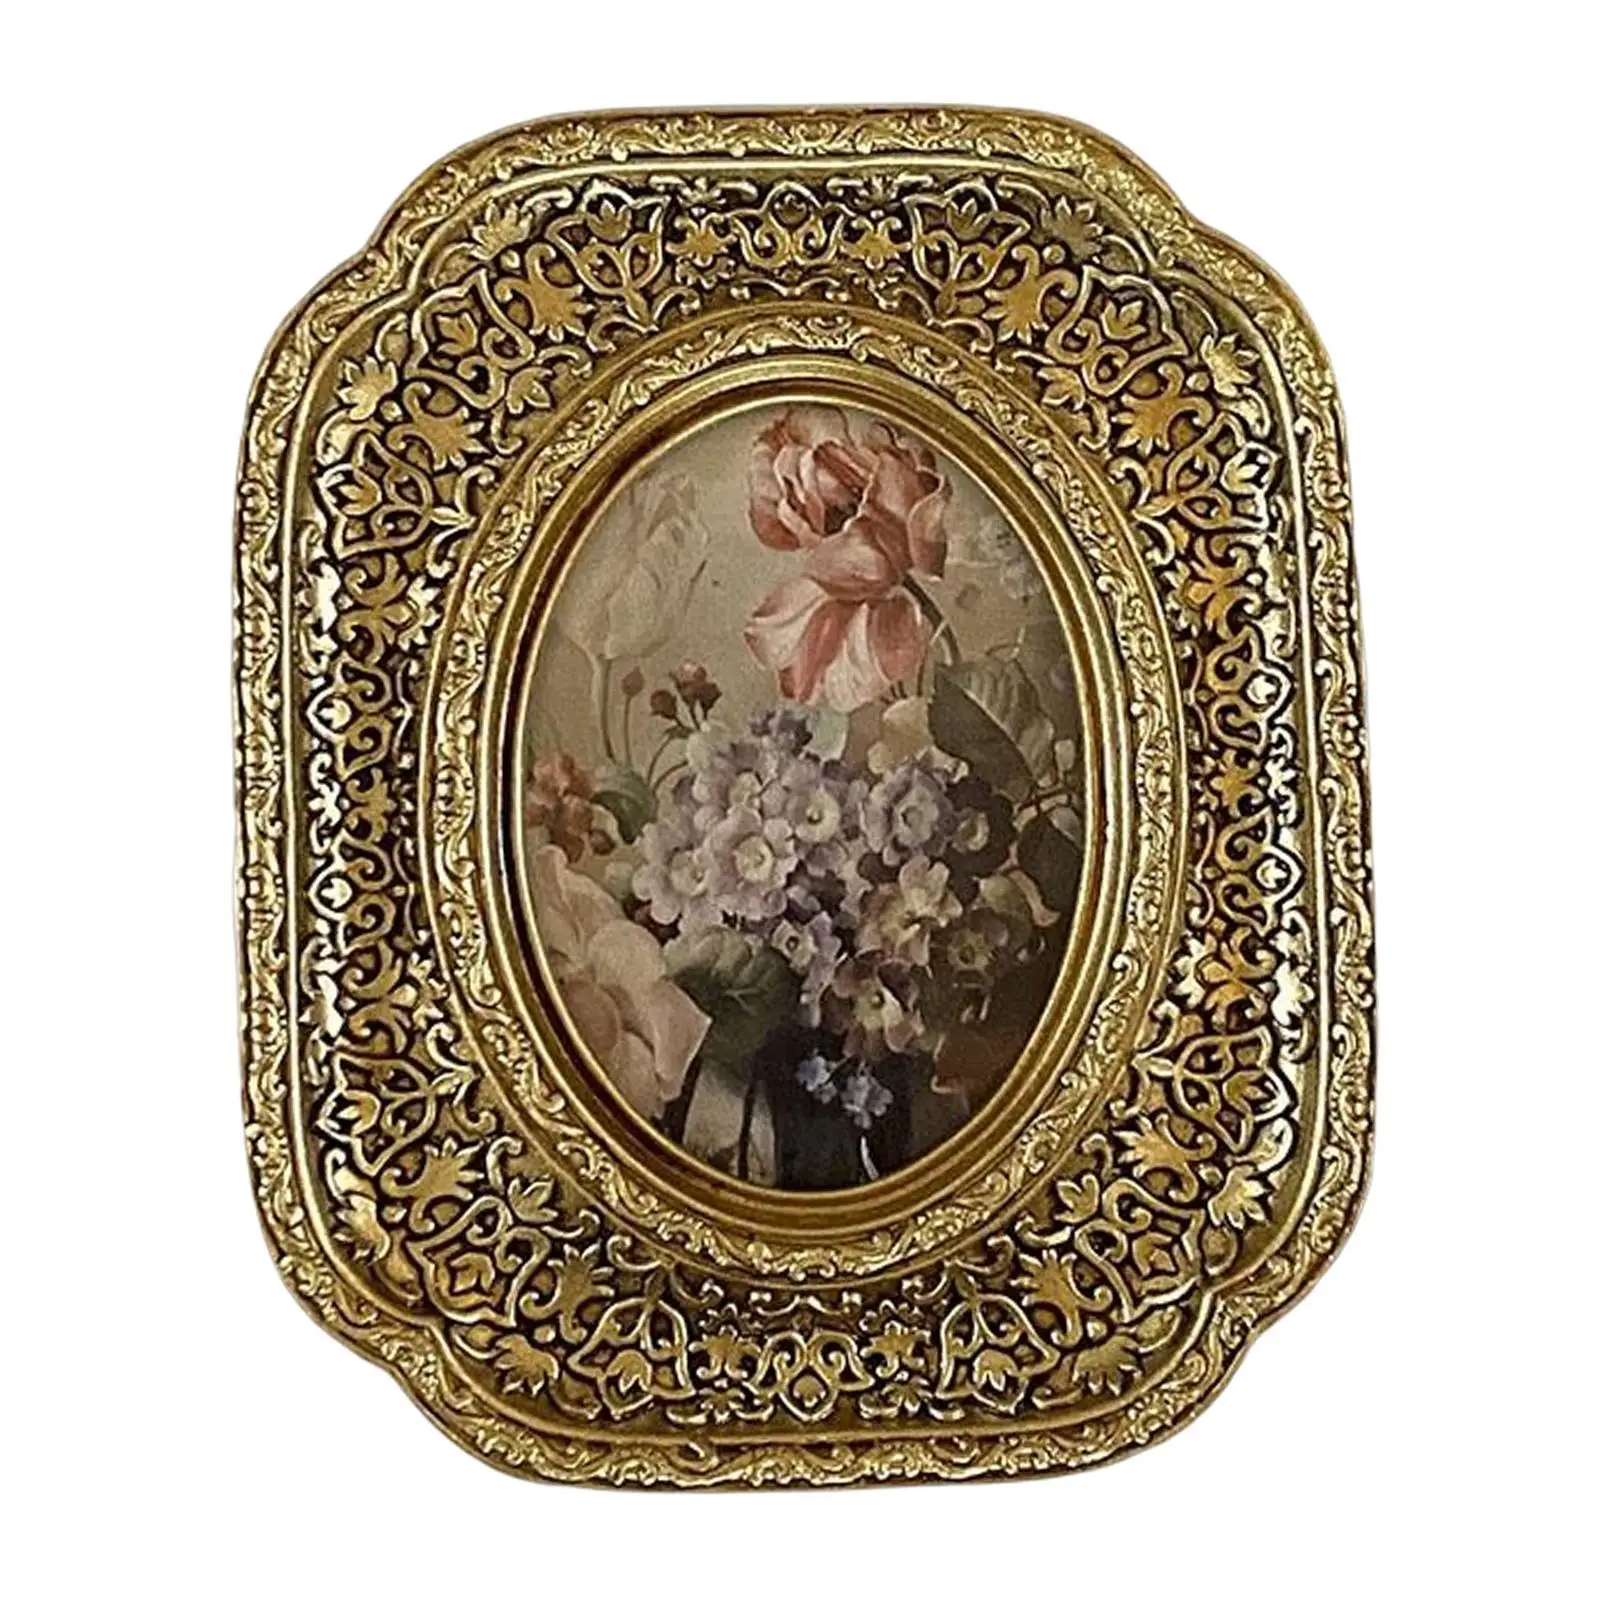 Retro Style Photo Frame Ornate Picture Frame for Holiday Home Decoration